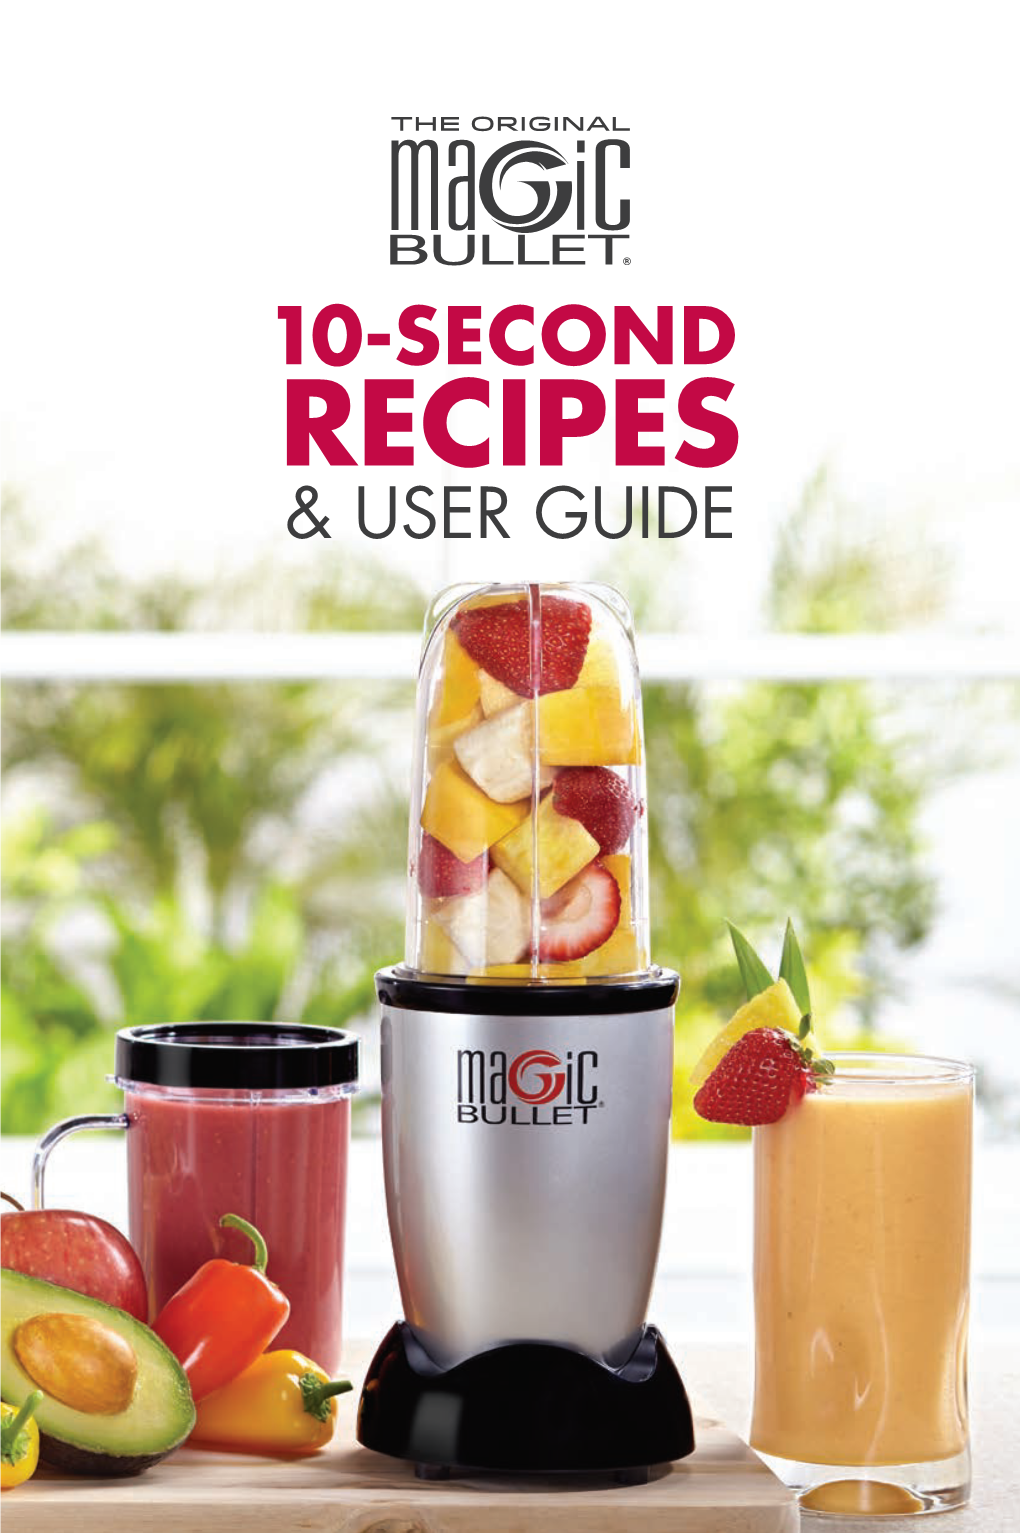 Magic Bullet Without Food Or Liquid Contents in Any of the Cups